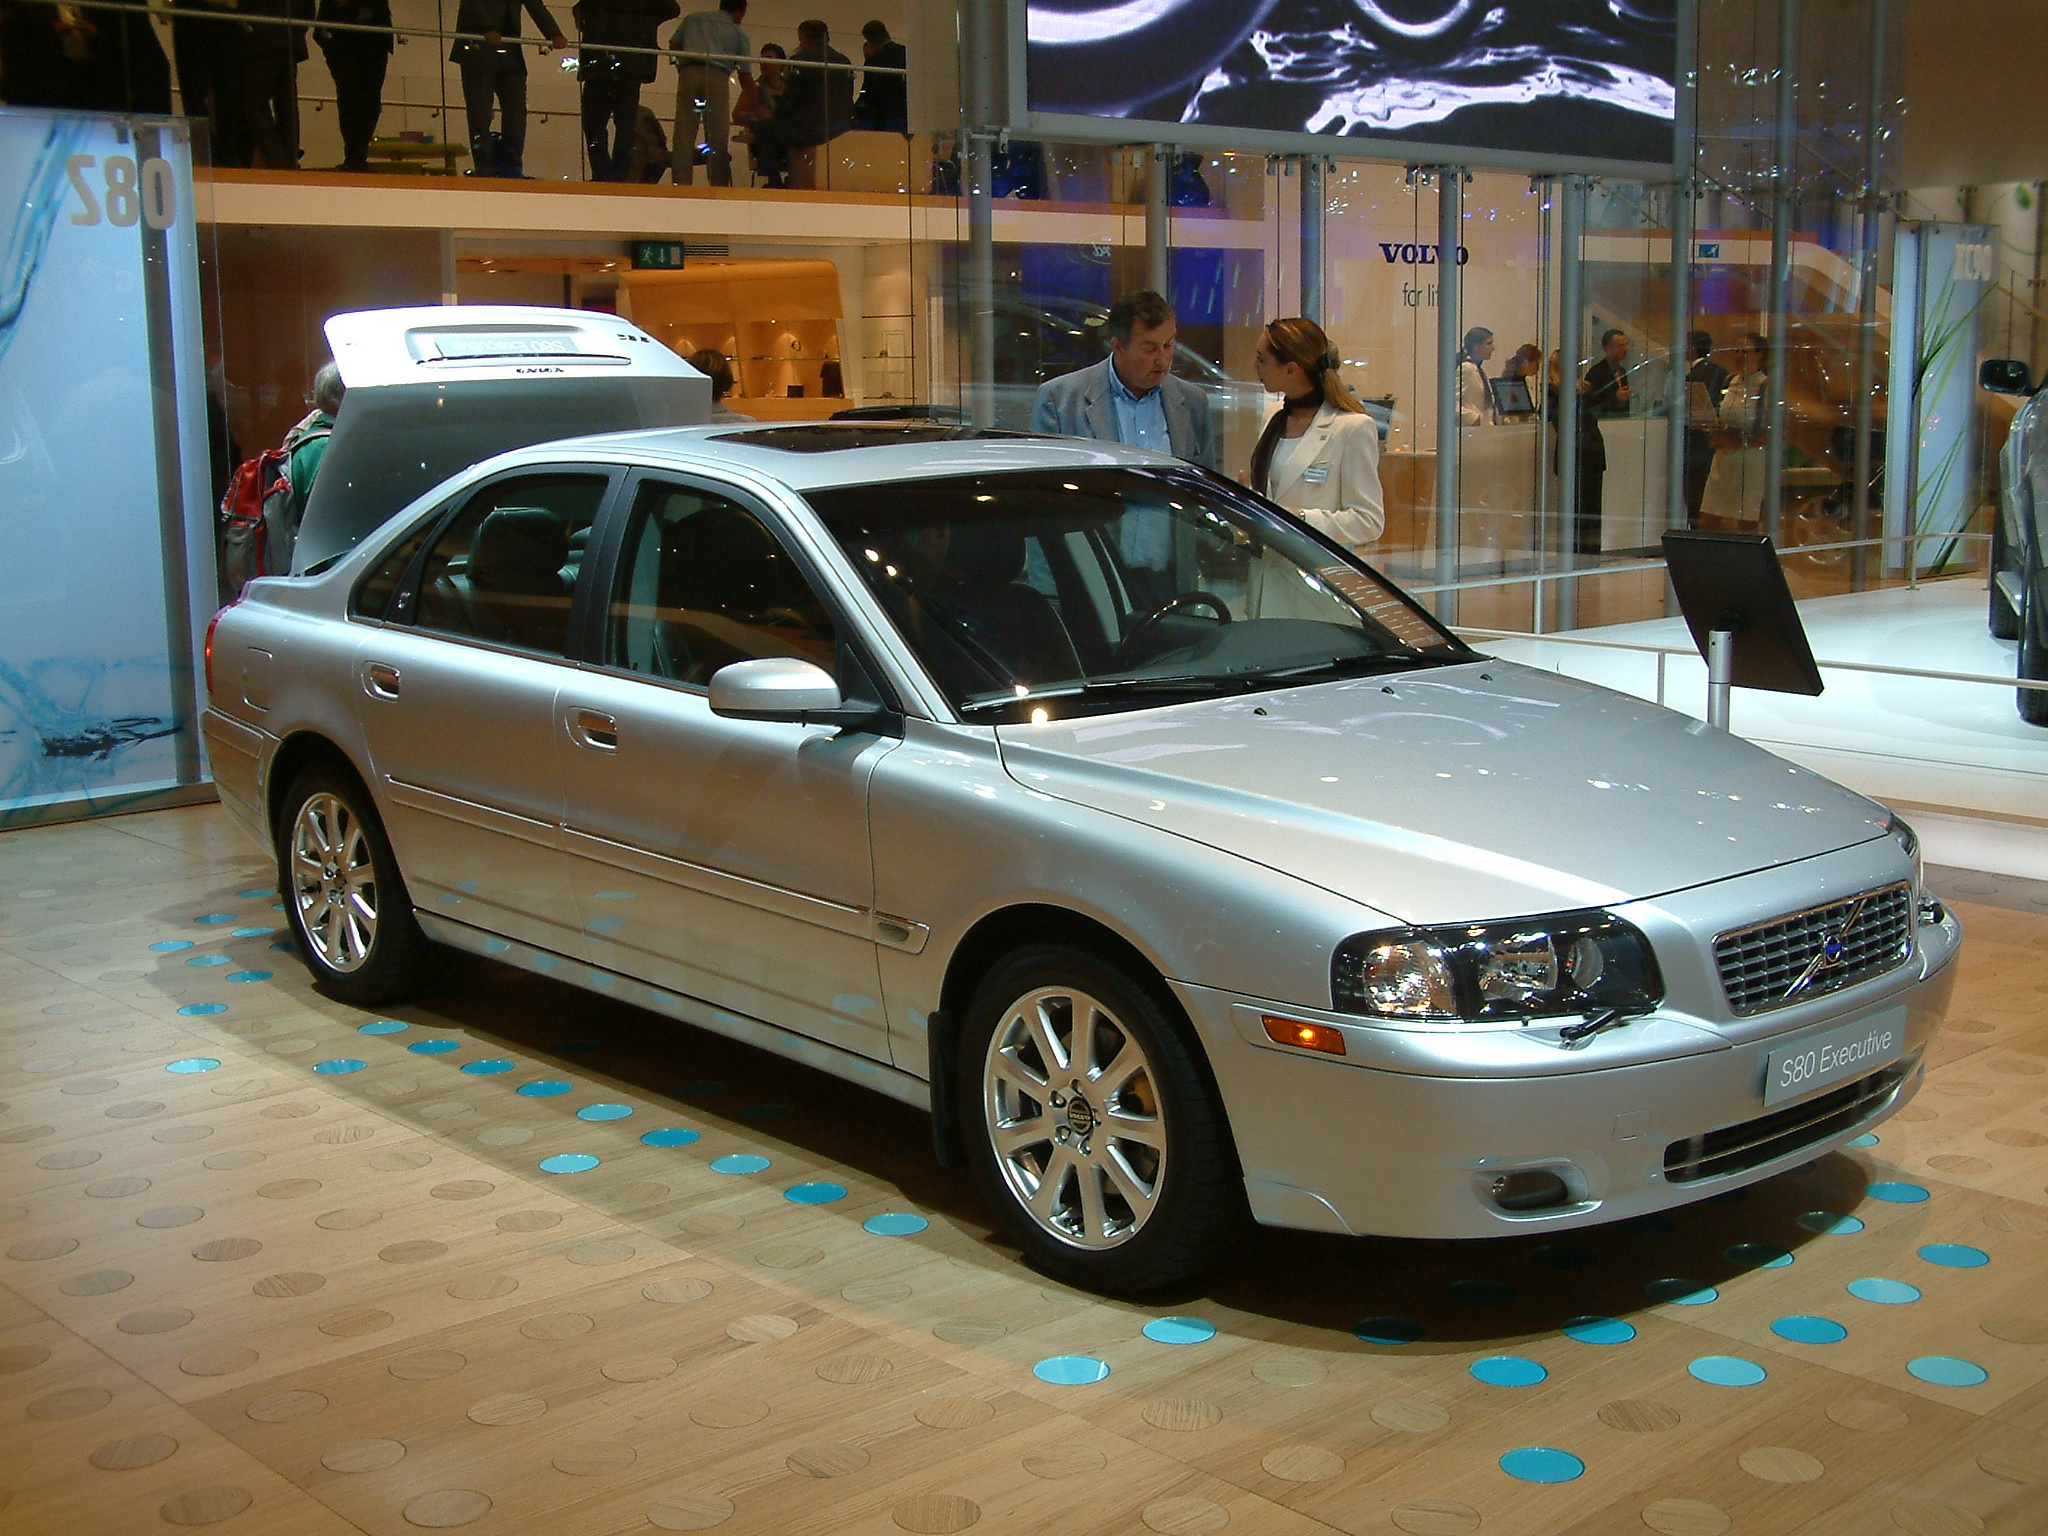 Volvo S80 - The Crittenden Automotive Library